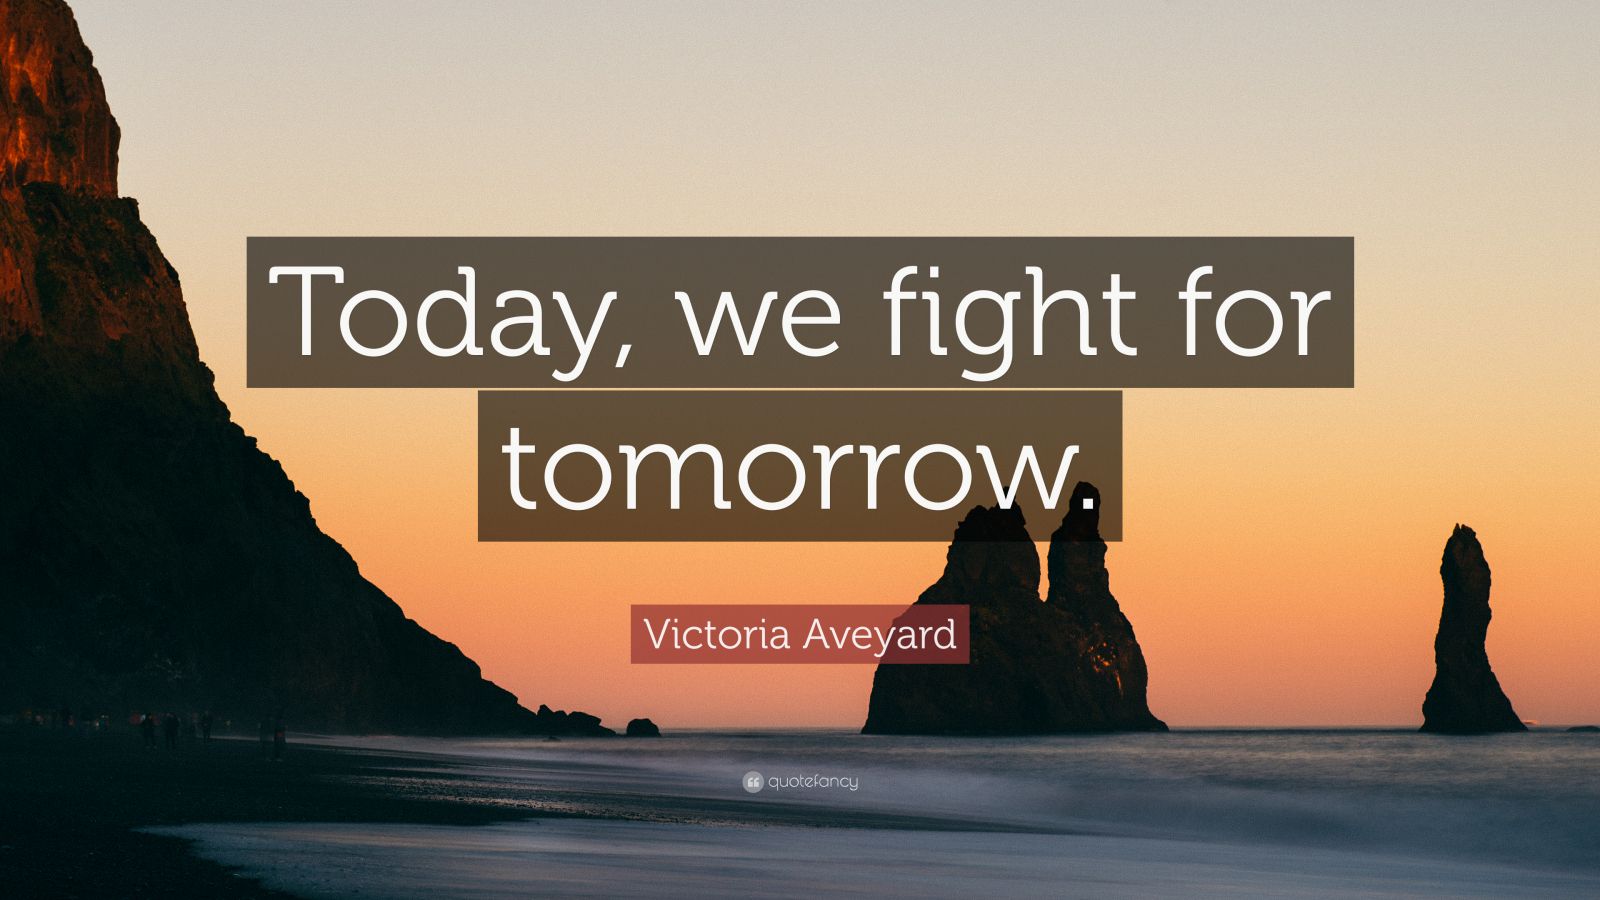 Victoria Aveyard Quote: “Today, we fight for tomorrow.”